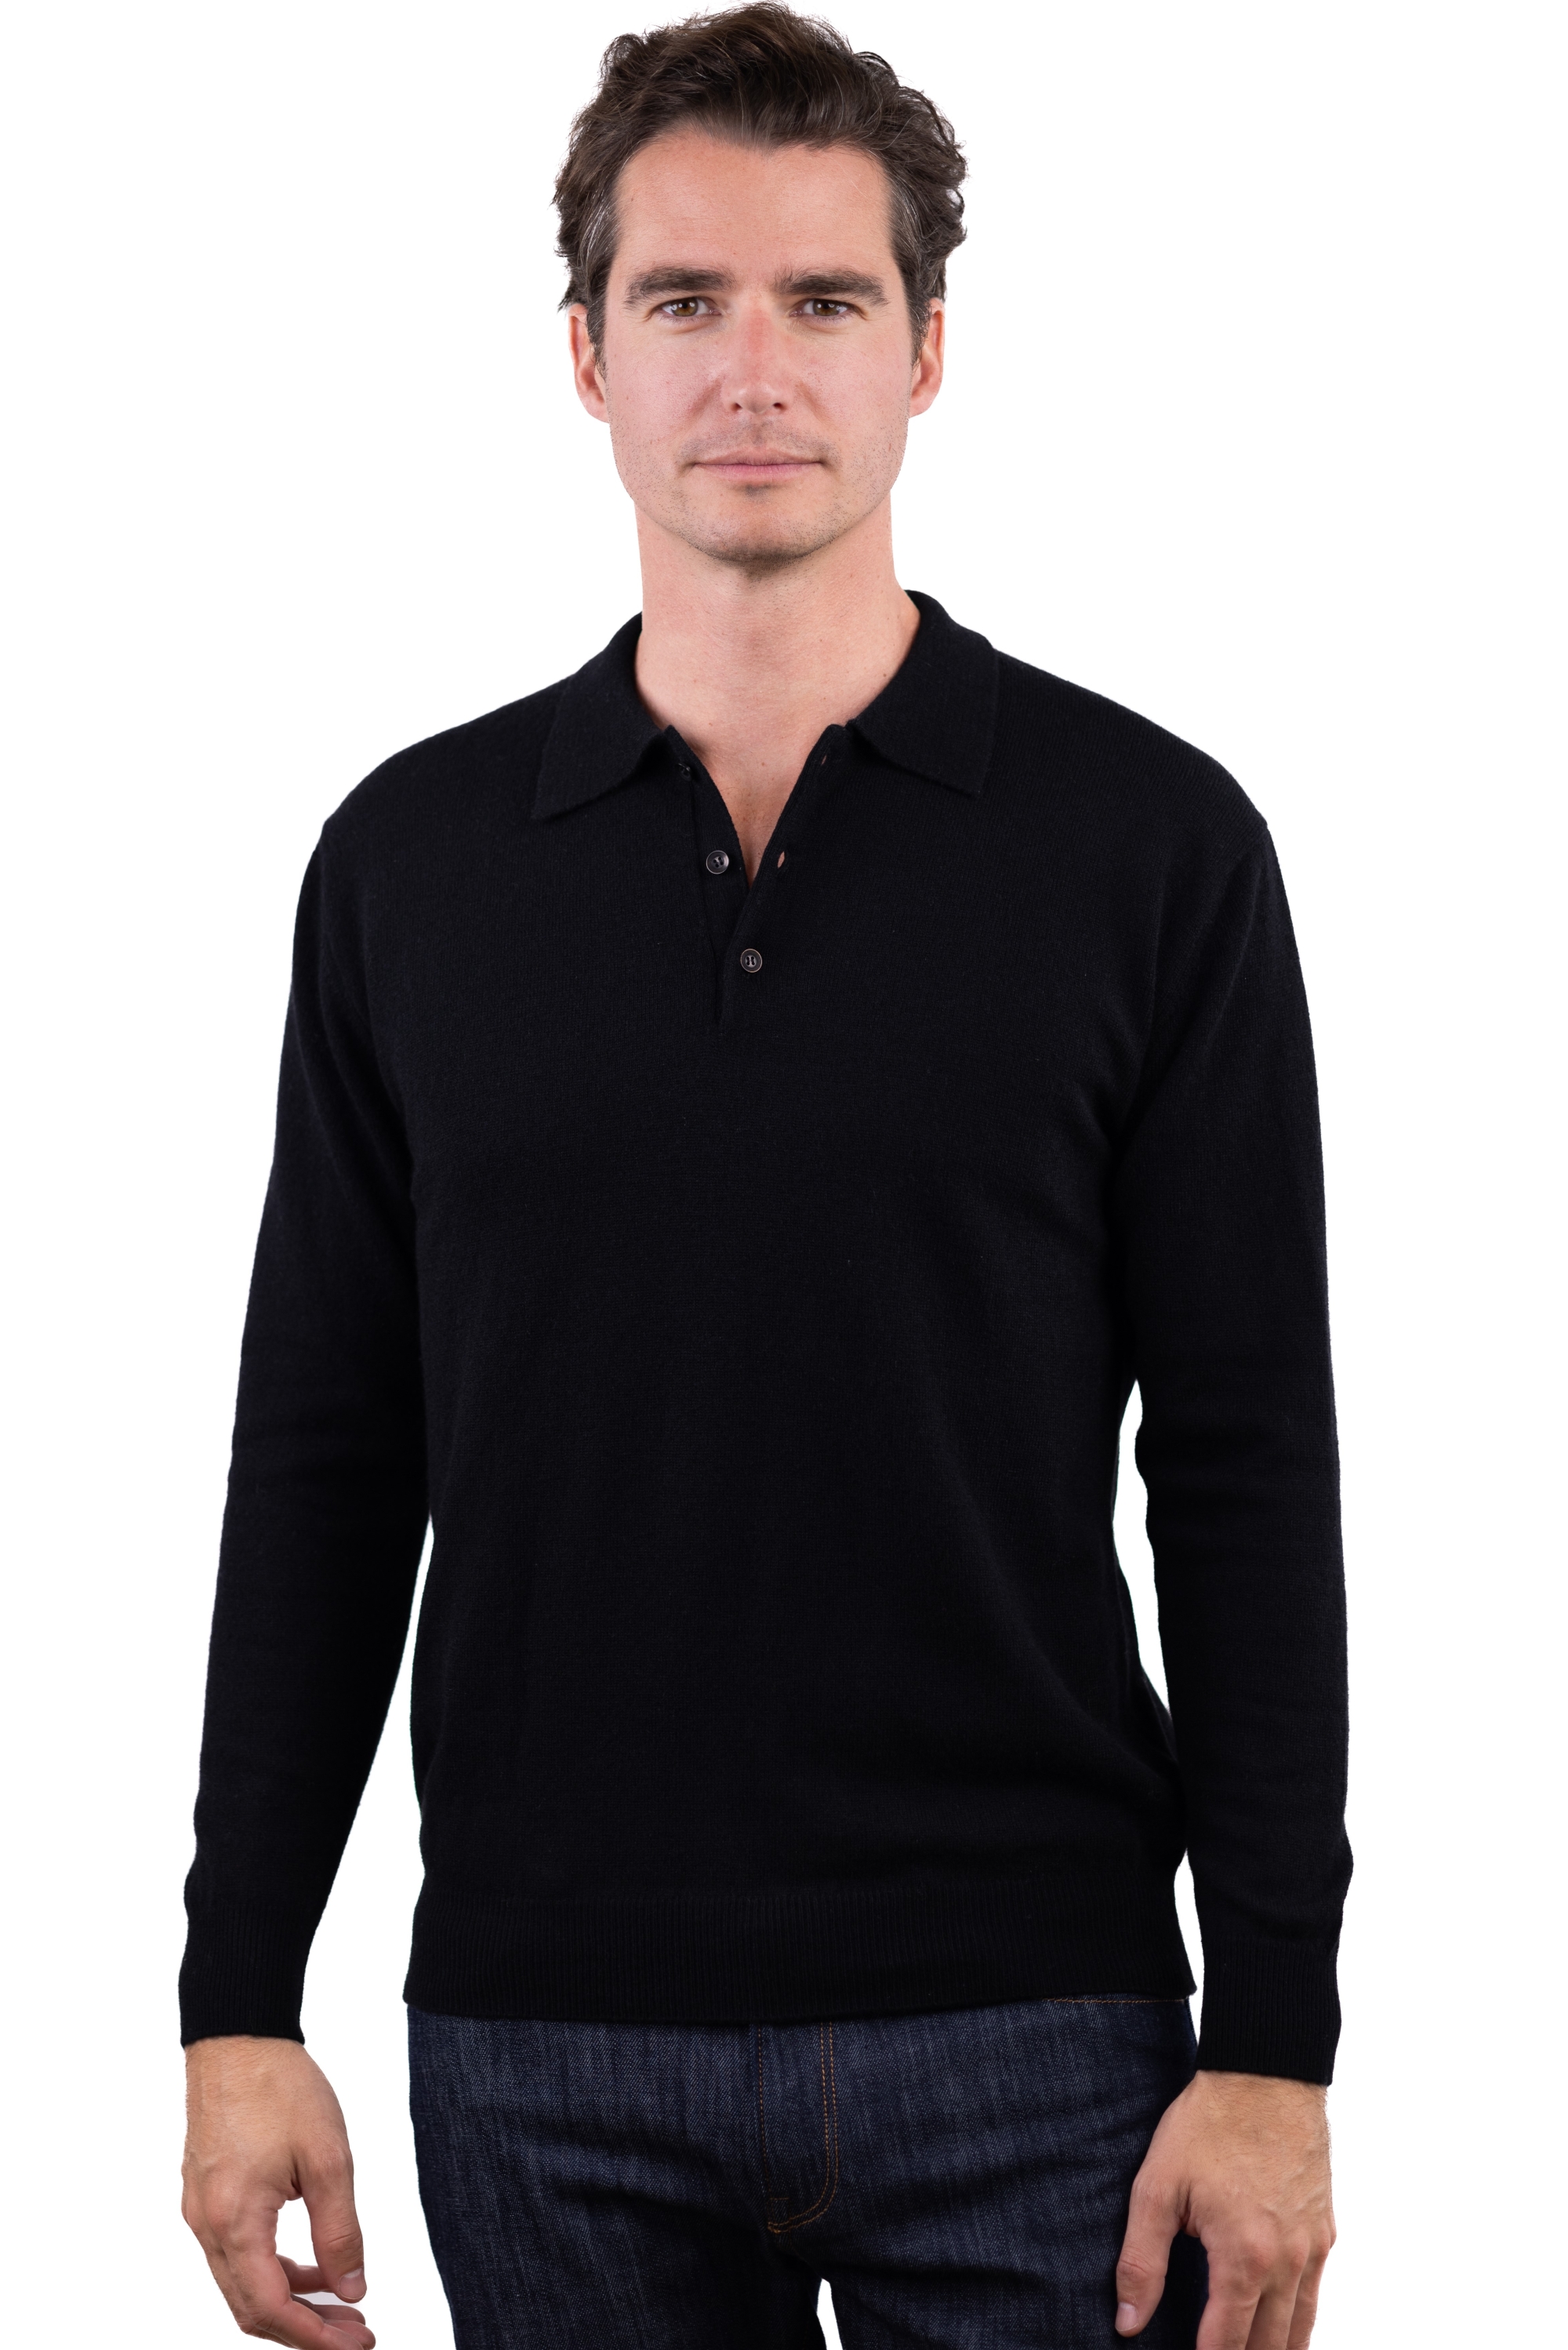 Cashmere men basic sweaters at low prices tarn first black l